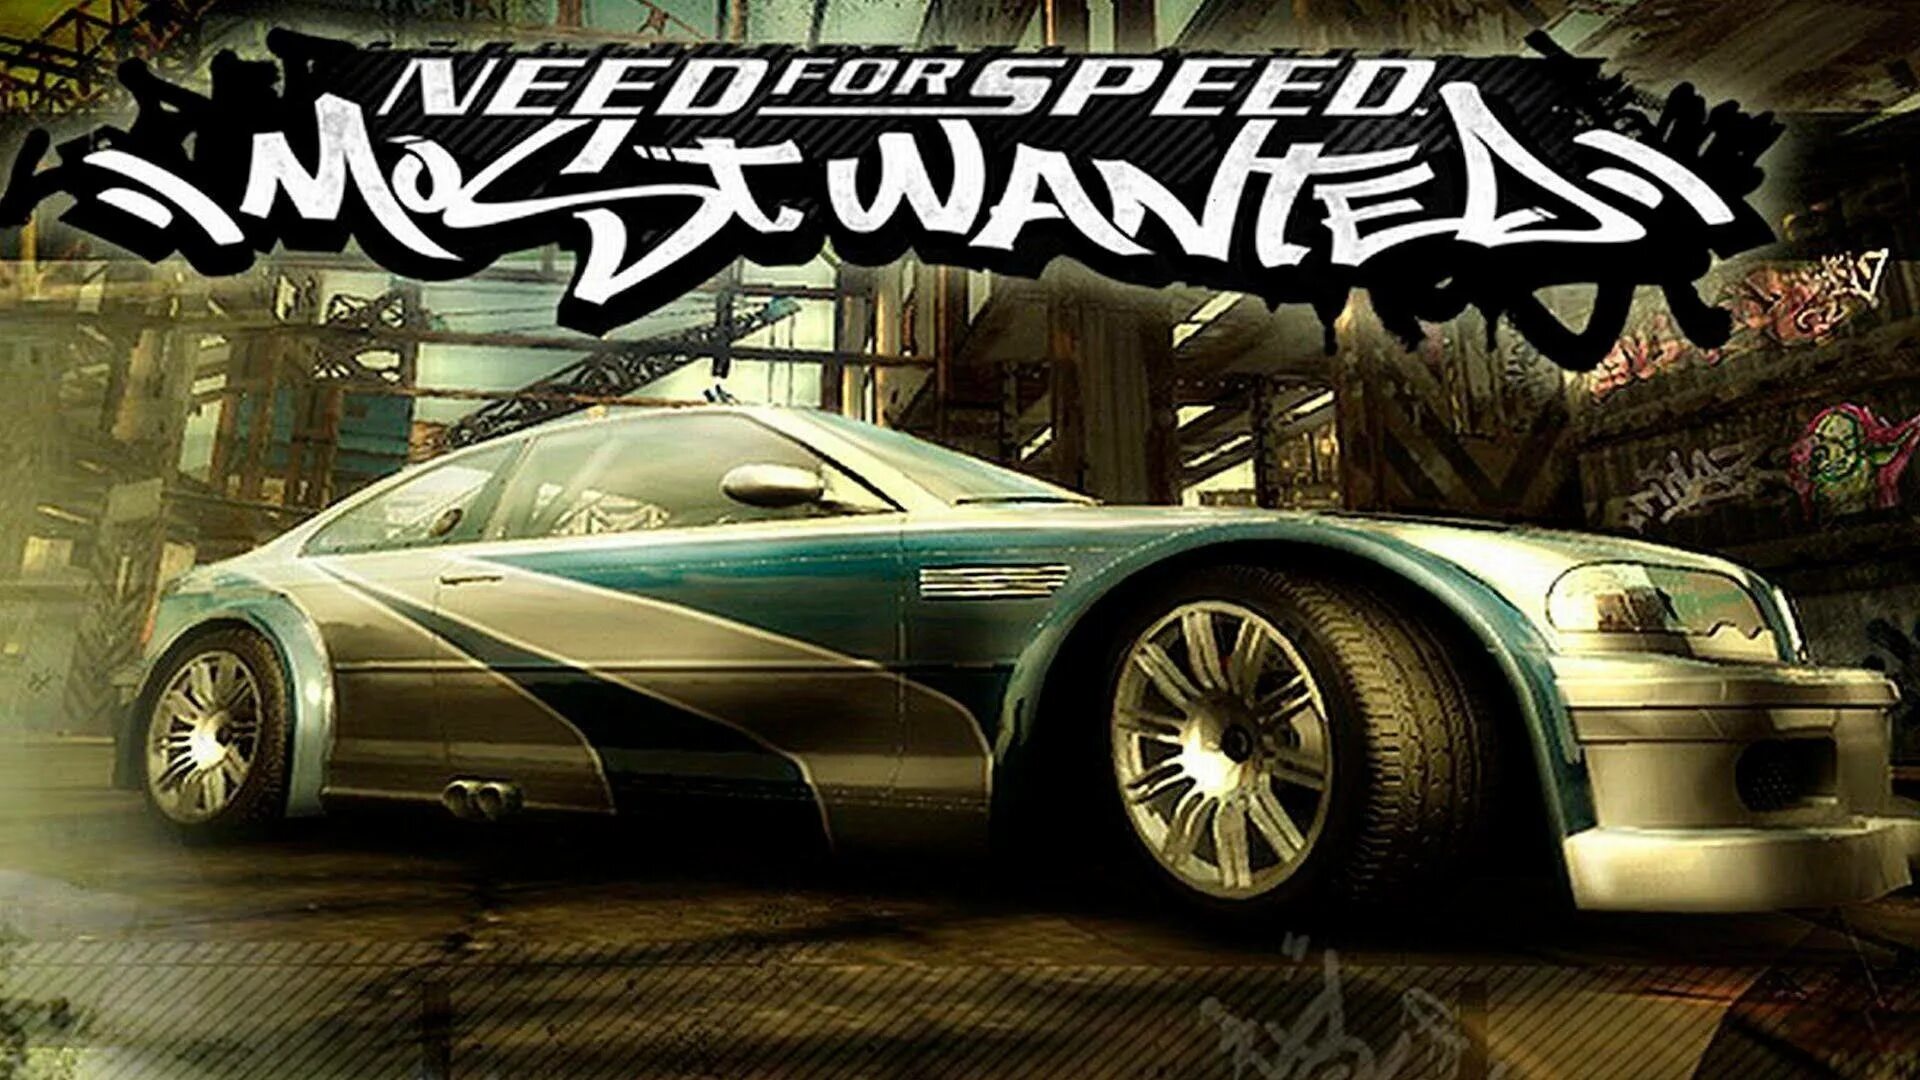 Need download. Most wanted 2005 обложка. NFS most wanted 2005 Постер. Постер нфс мост вантед 2005. Вебстер NFS most wanted.